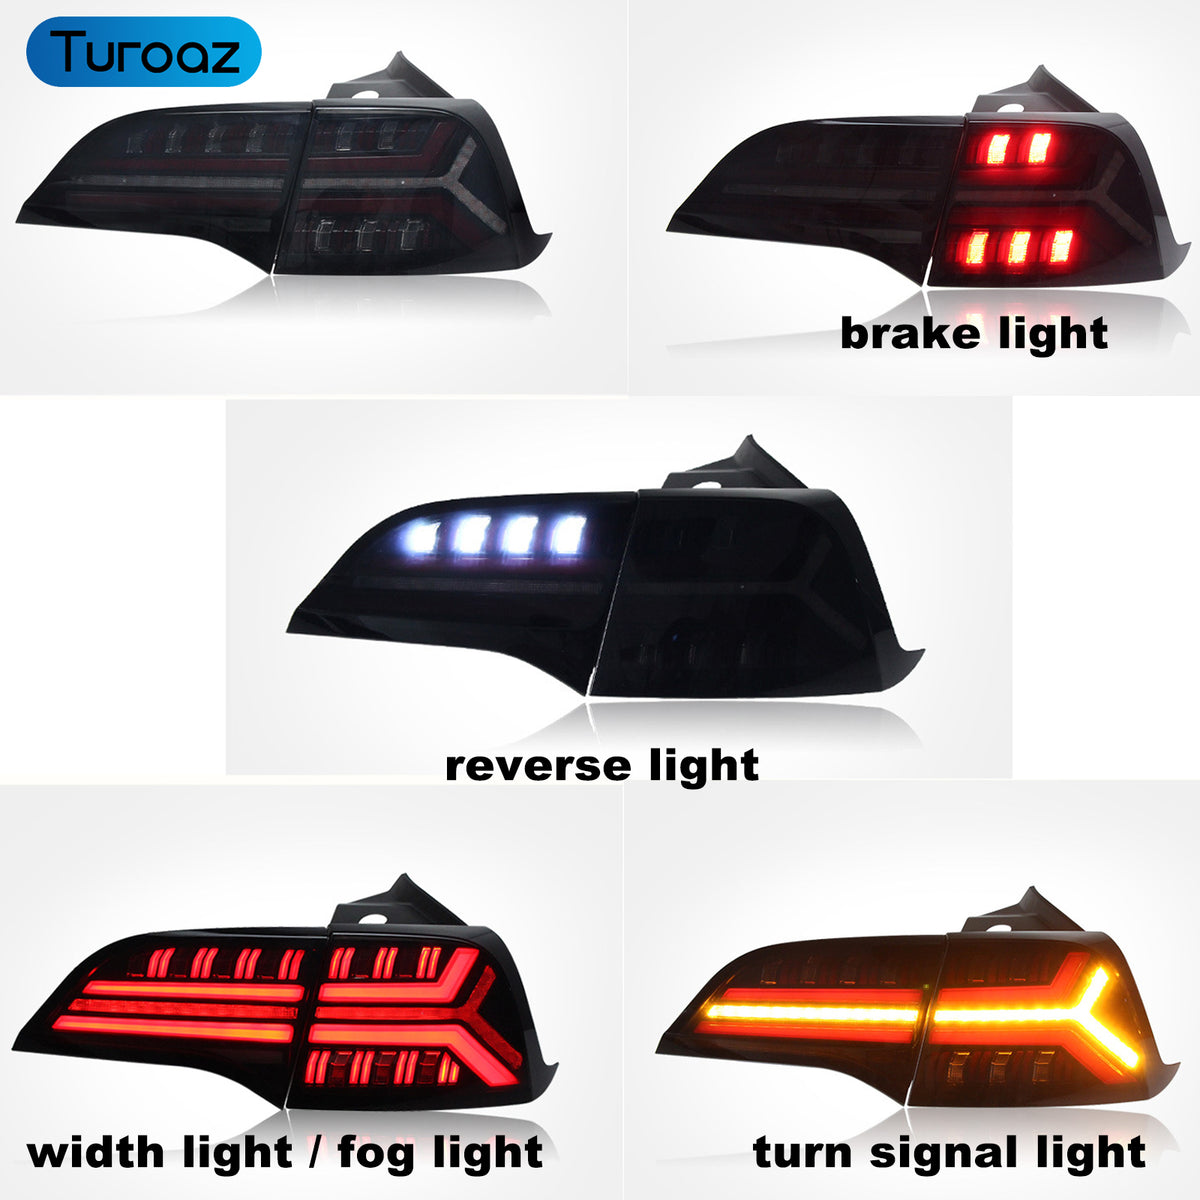 Turoaz LED Tail Light Assembly for Tesla Model 3 Y 2021+, Streamlined LED Sequential Turn Lights with Dynamic Startup Back Rear Lamps, Reverse Lights Accessories (fish bone)